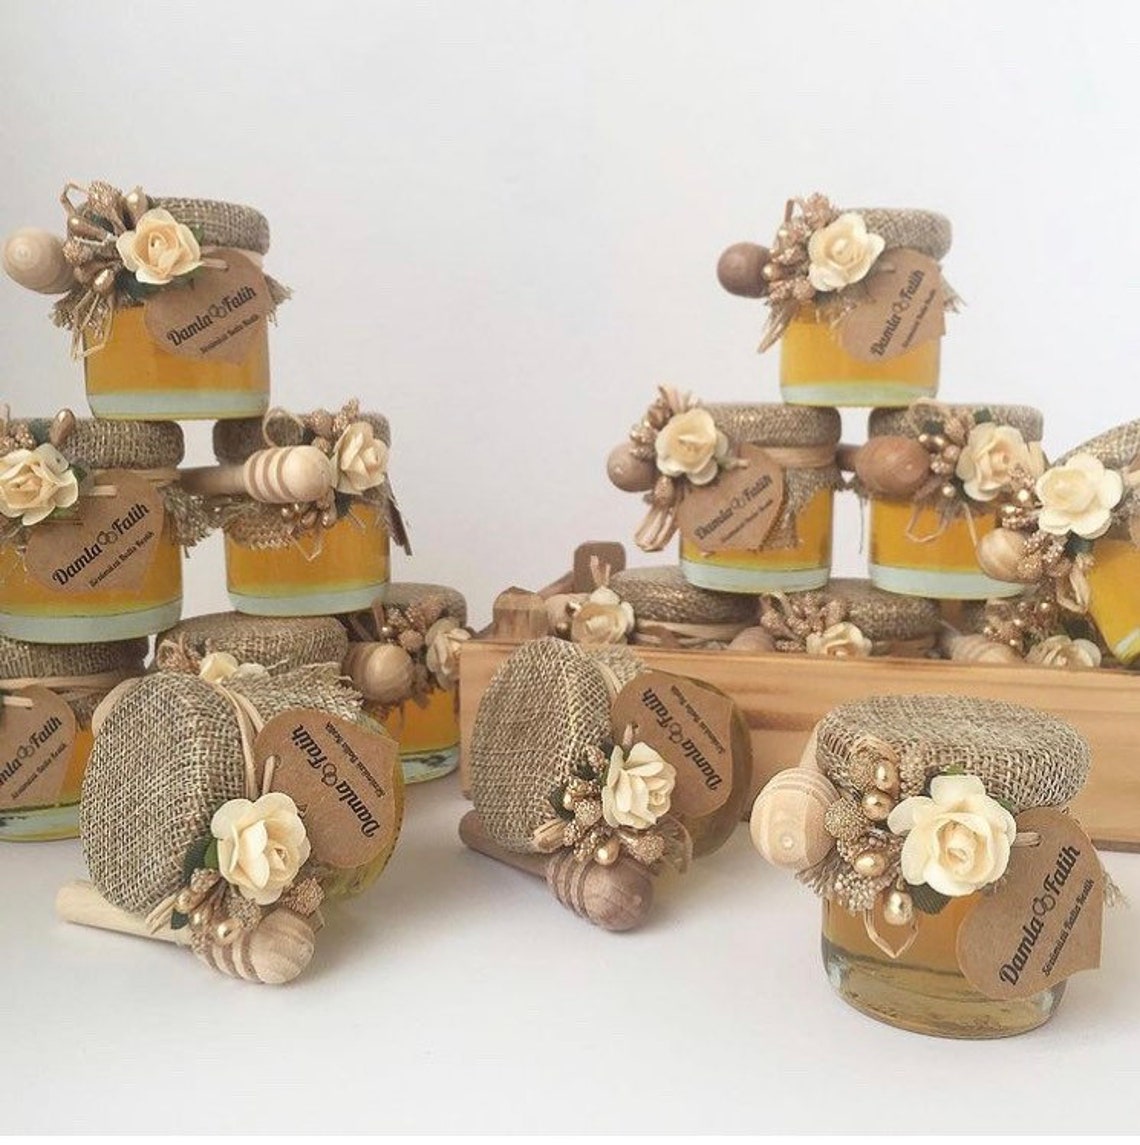 Honey jar gift for wedding baby shower personalized gift